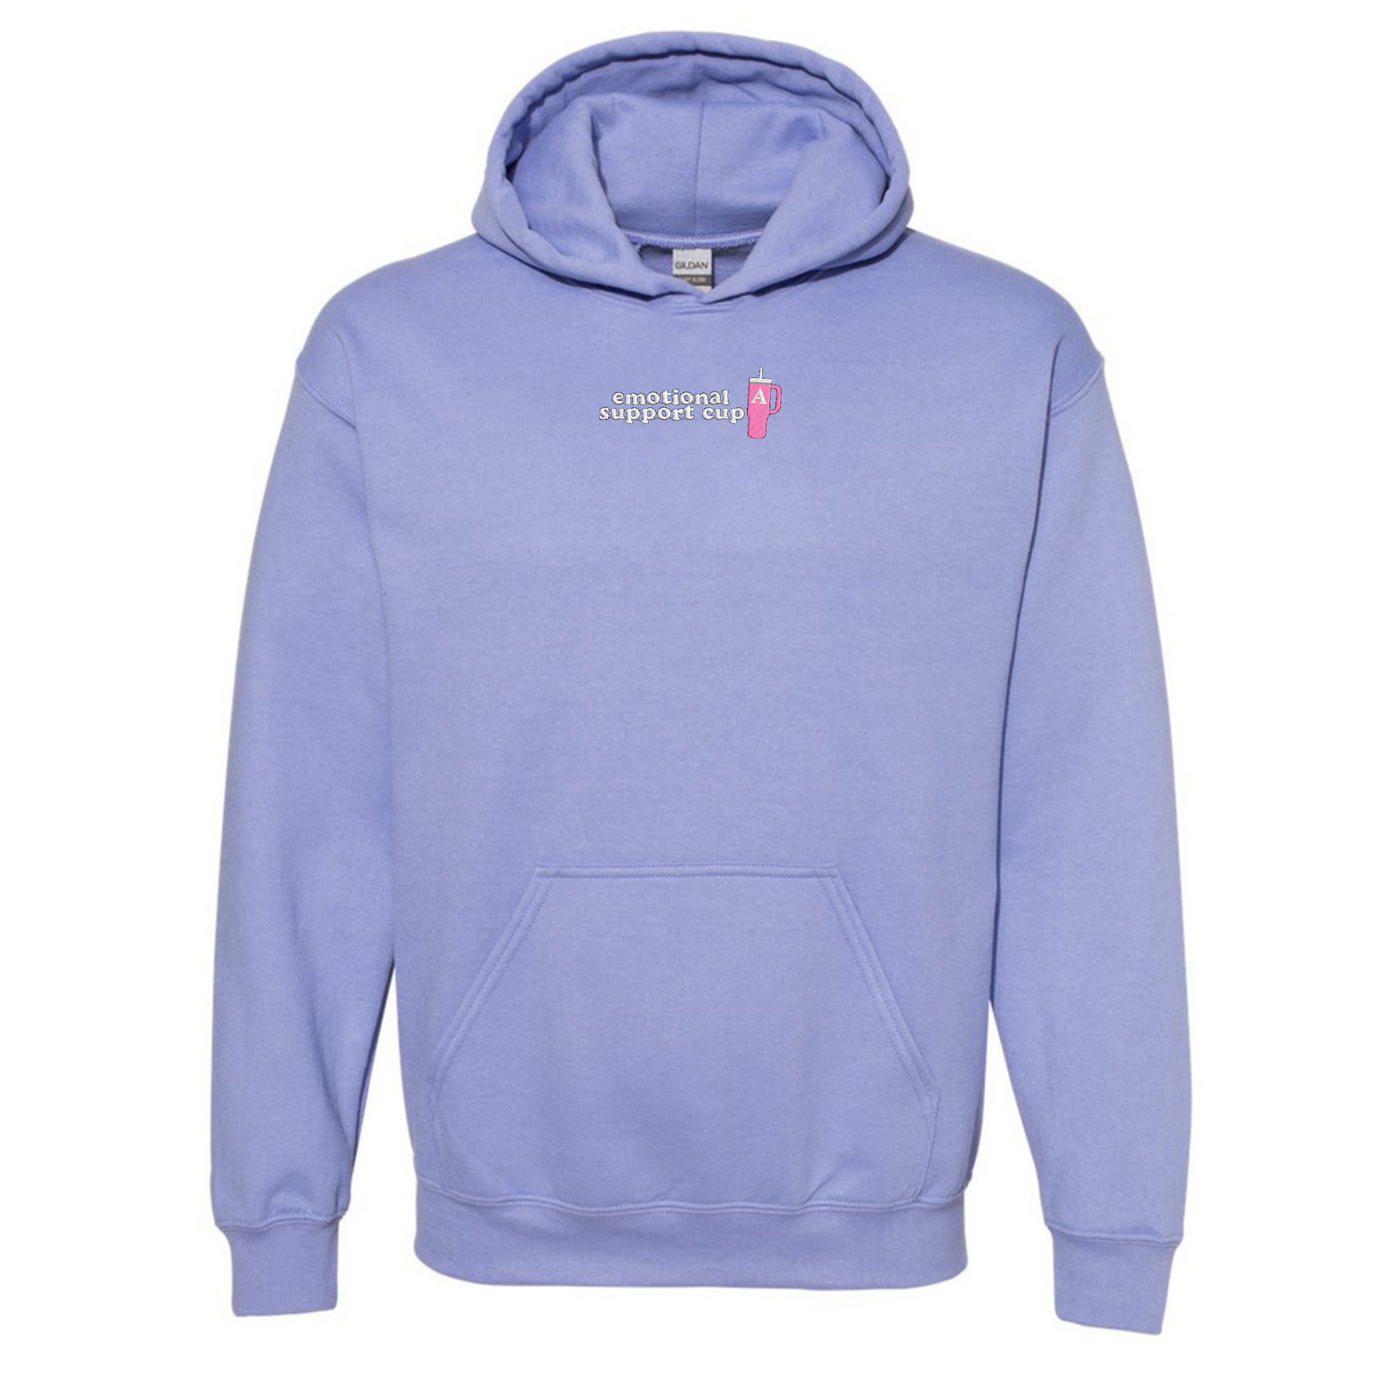 Initial 'Emotional Support Cup' Hoodie